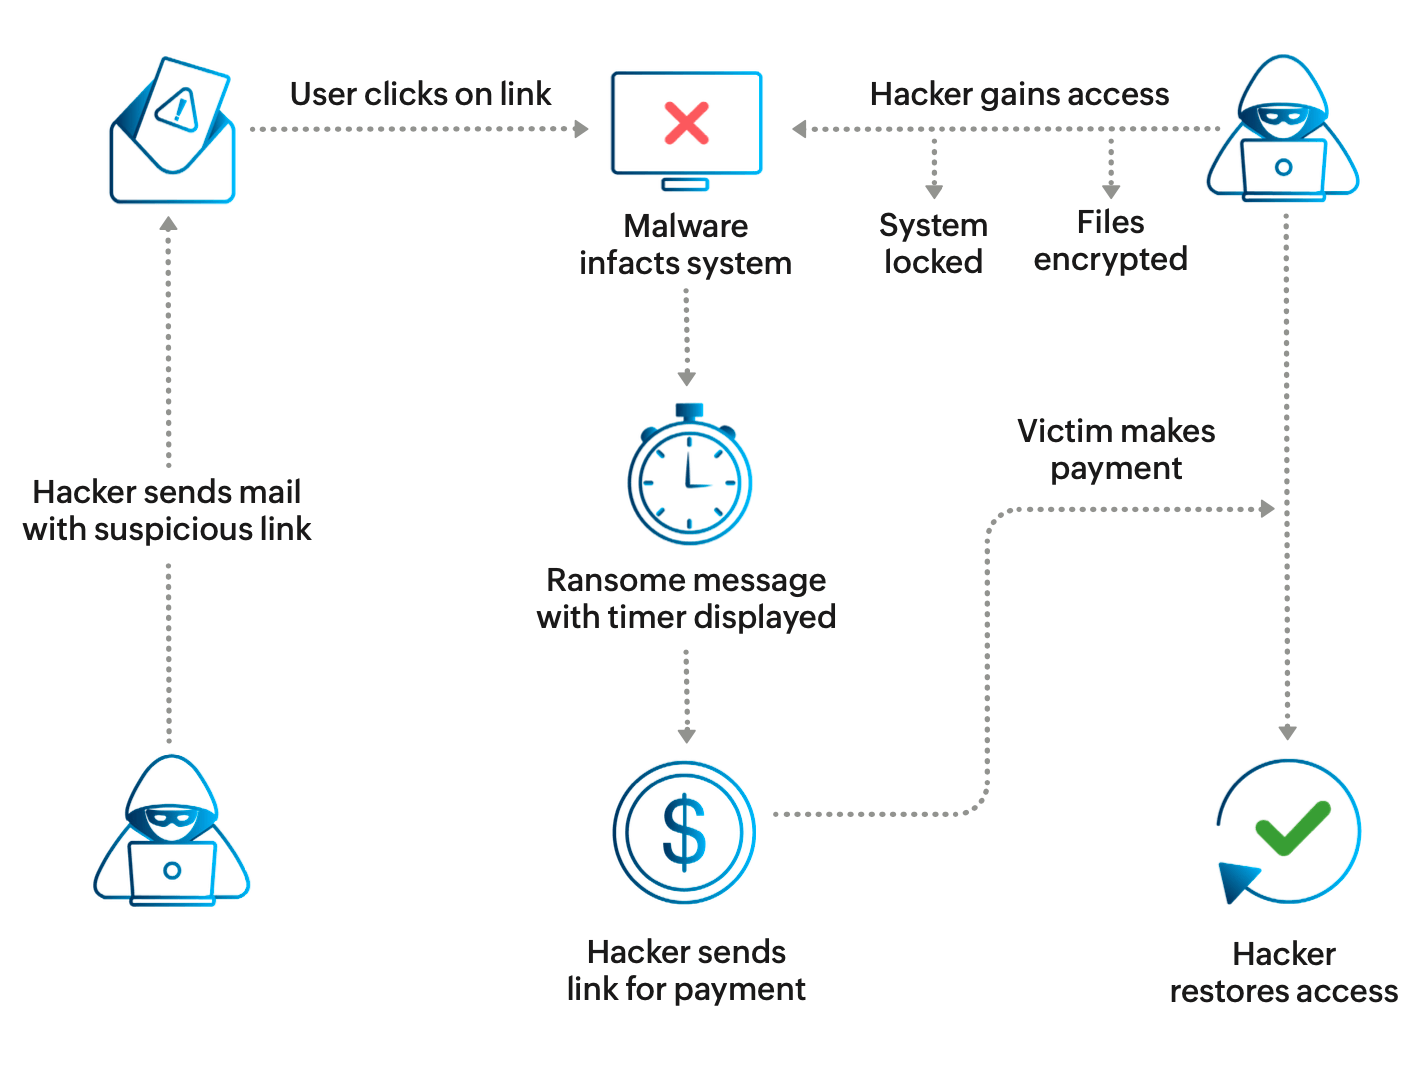 How does ransomware work